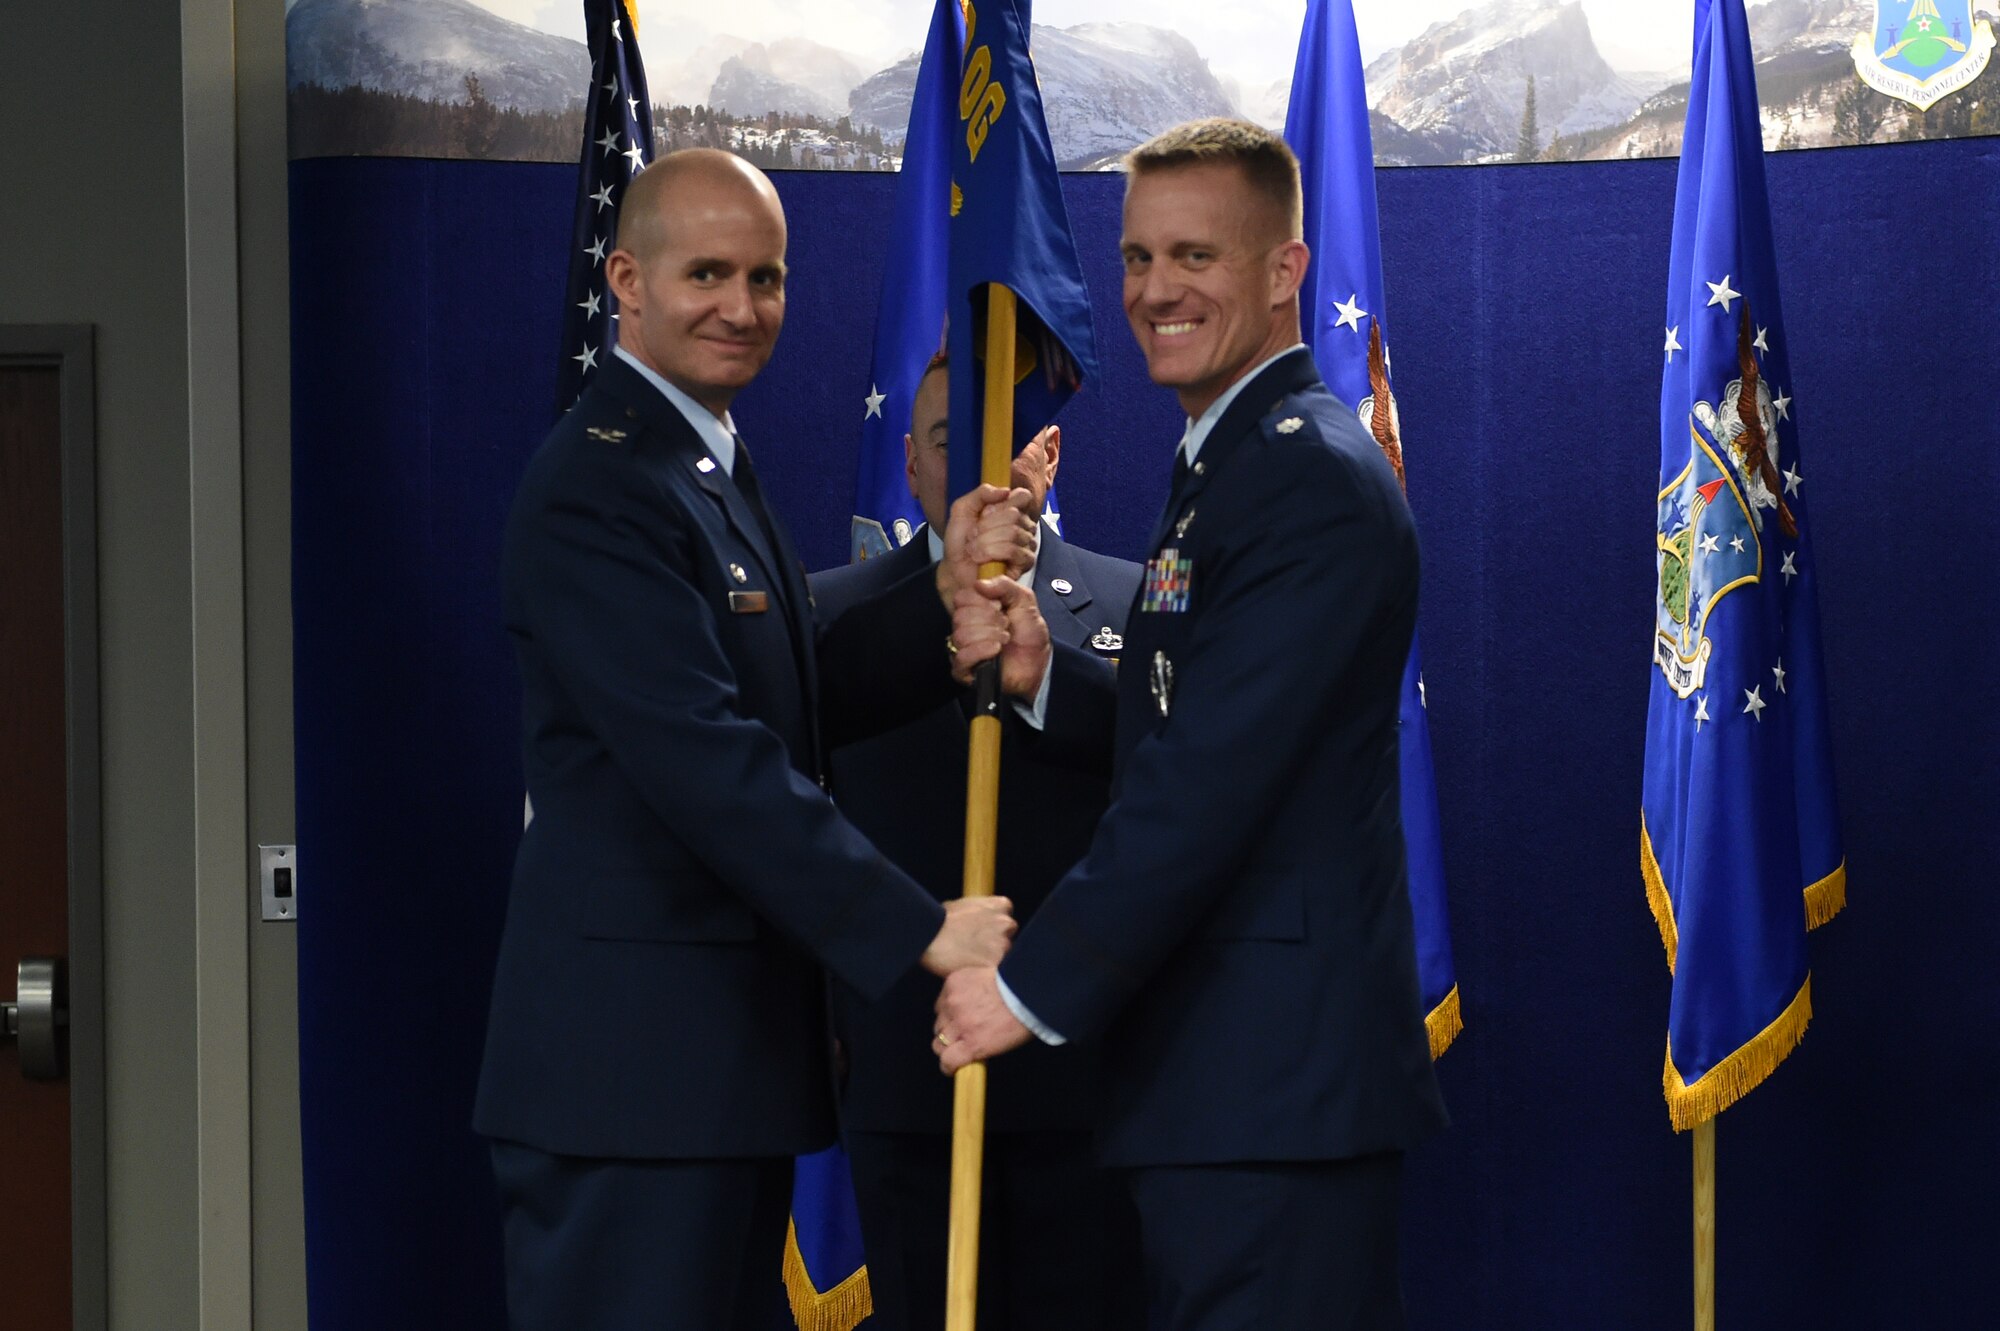 Col. Michael Assid, 310th Operations Group commander, left, presents the 8th Space Warning Squadron guidon to Lt. Col. Keith Jansa, 8 SWS commander, right, signifying his assumption of command March 8, 2015, at the Air Reserve Personnel Center on Buckley Air Force Base, Colo. During the ceremony, Jansa assumed command from Lt. Col. Nathan Yates after two years of service to the unit. (U.S. Air Force photo by Airman 1st Class Emily E. Amyotte/Released)